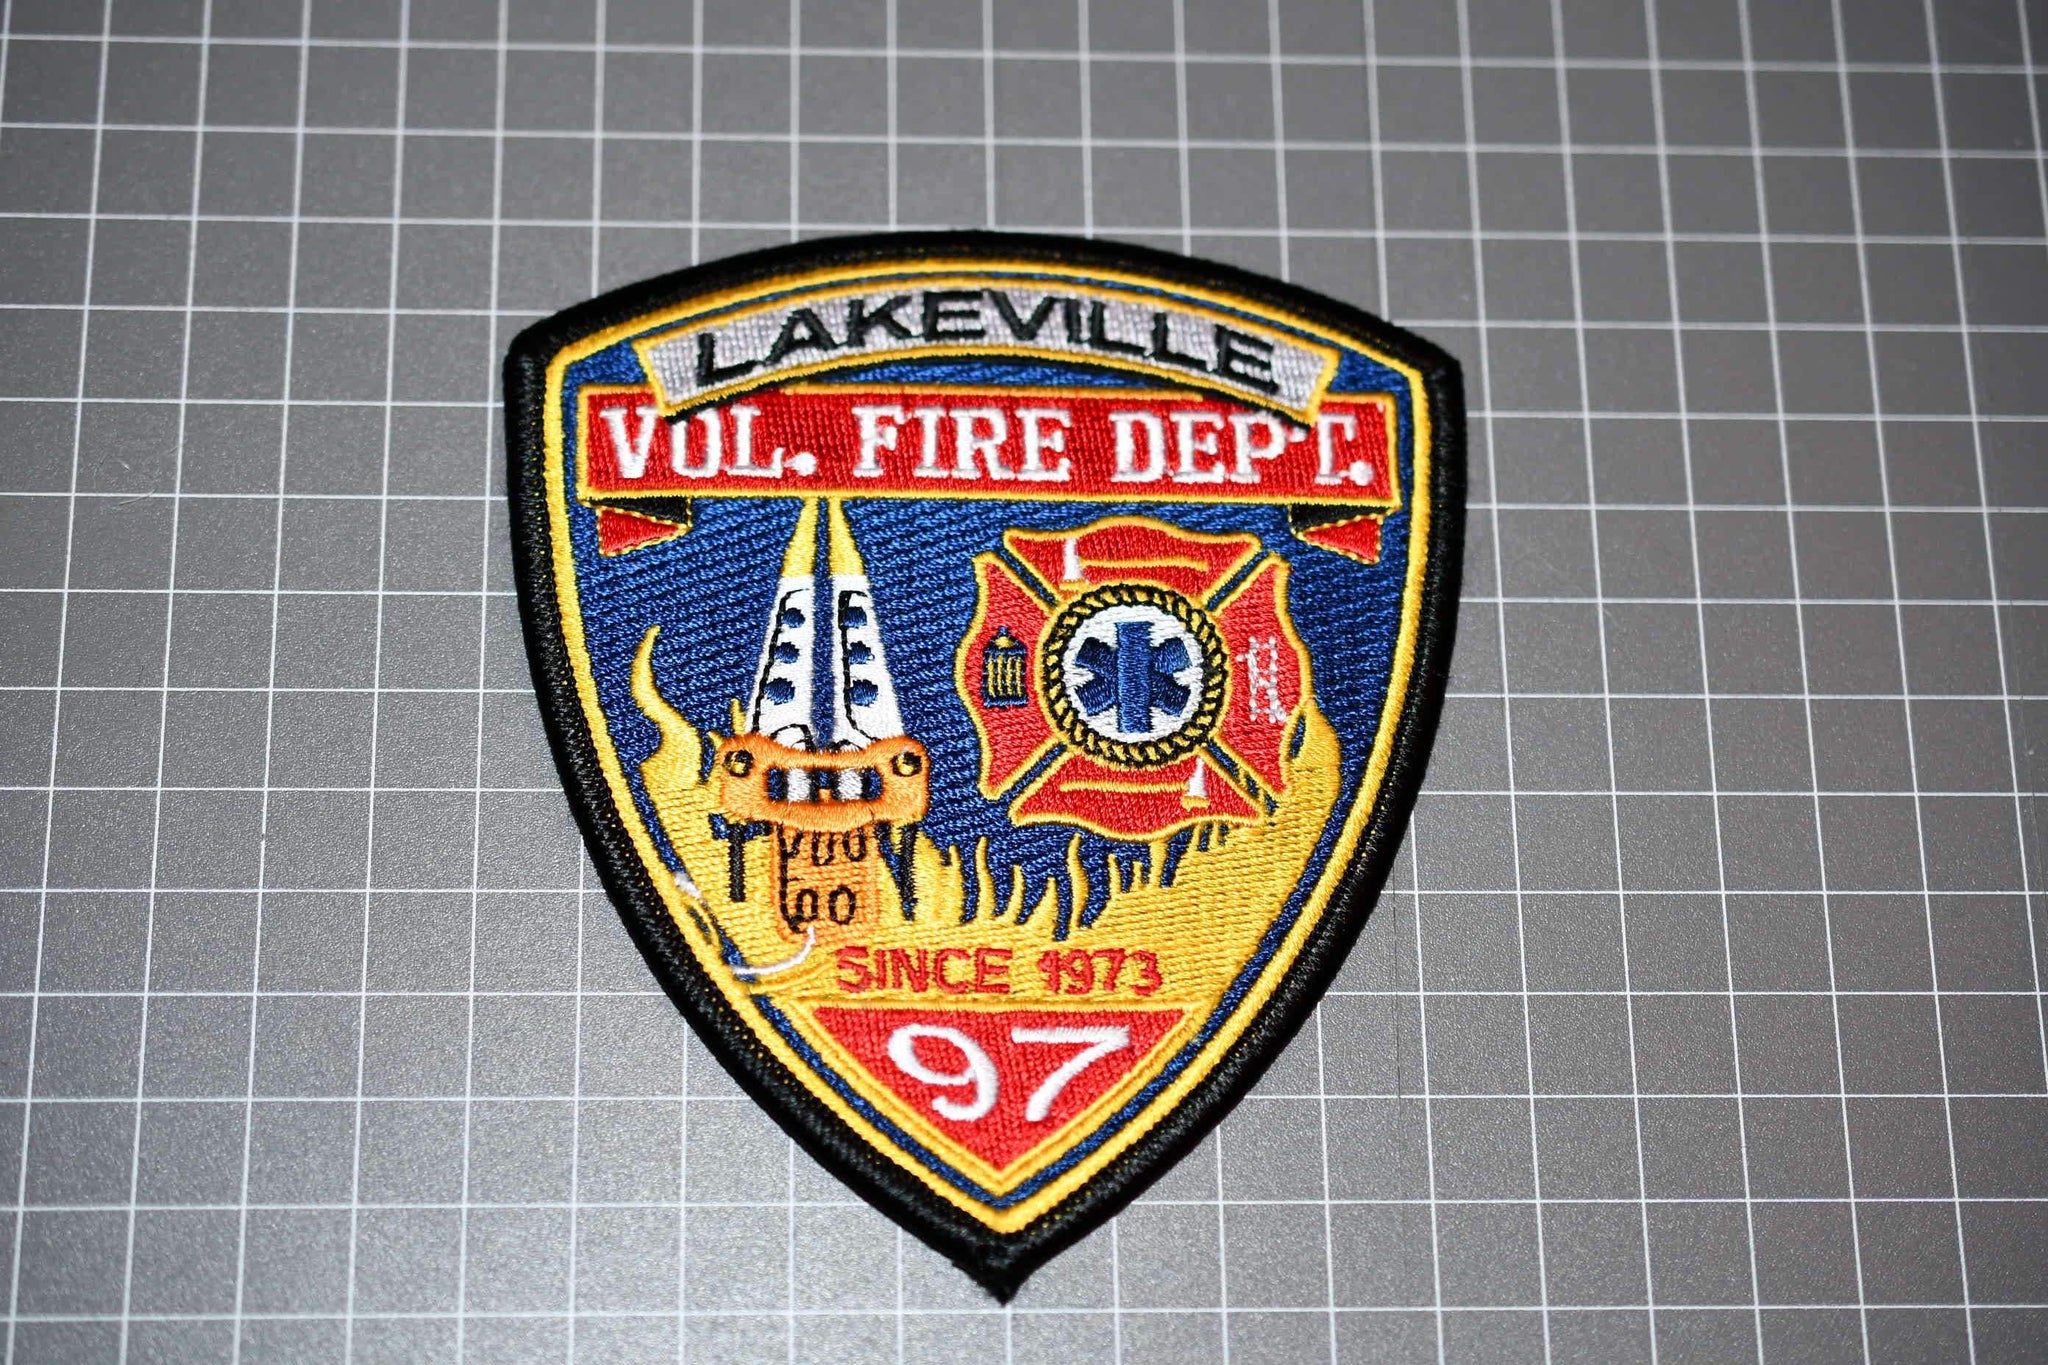 Lakeville Volunteer Fire Department Patch (B19)